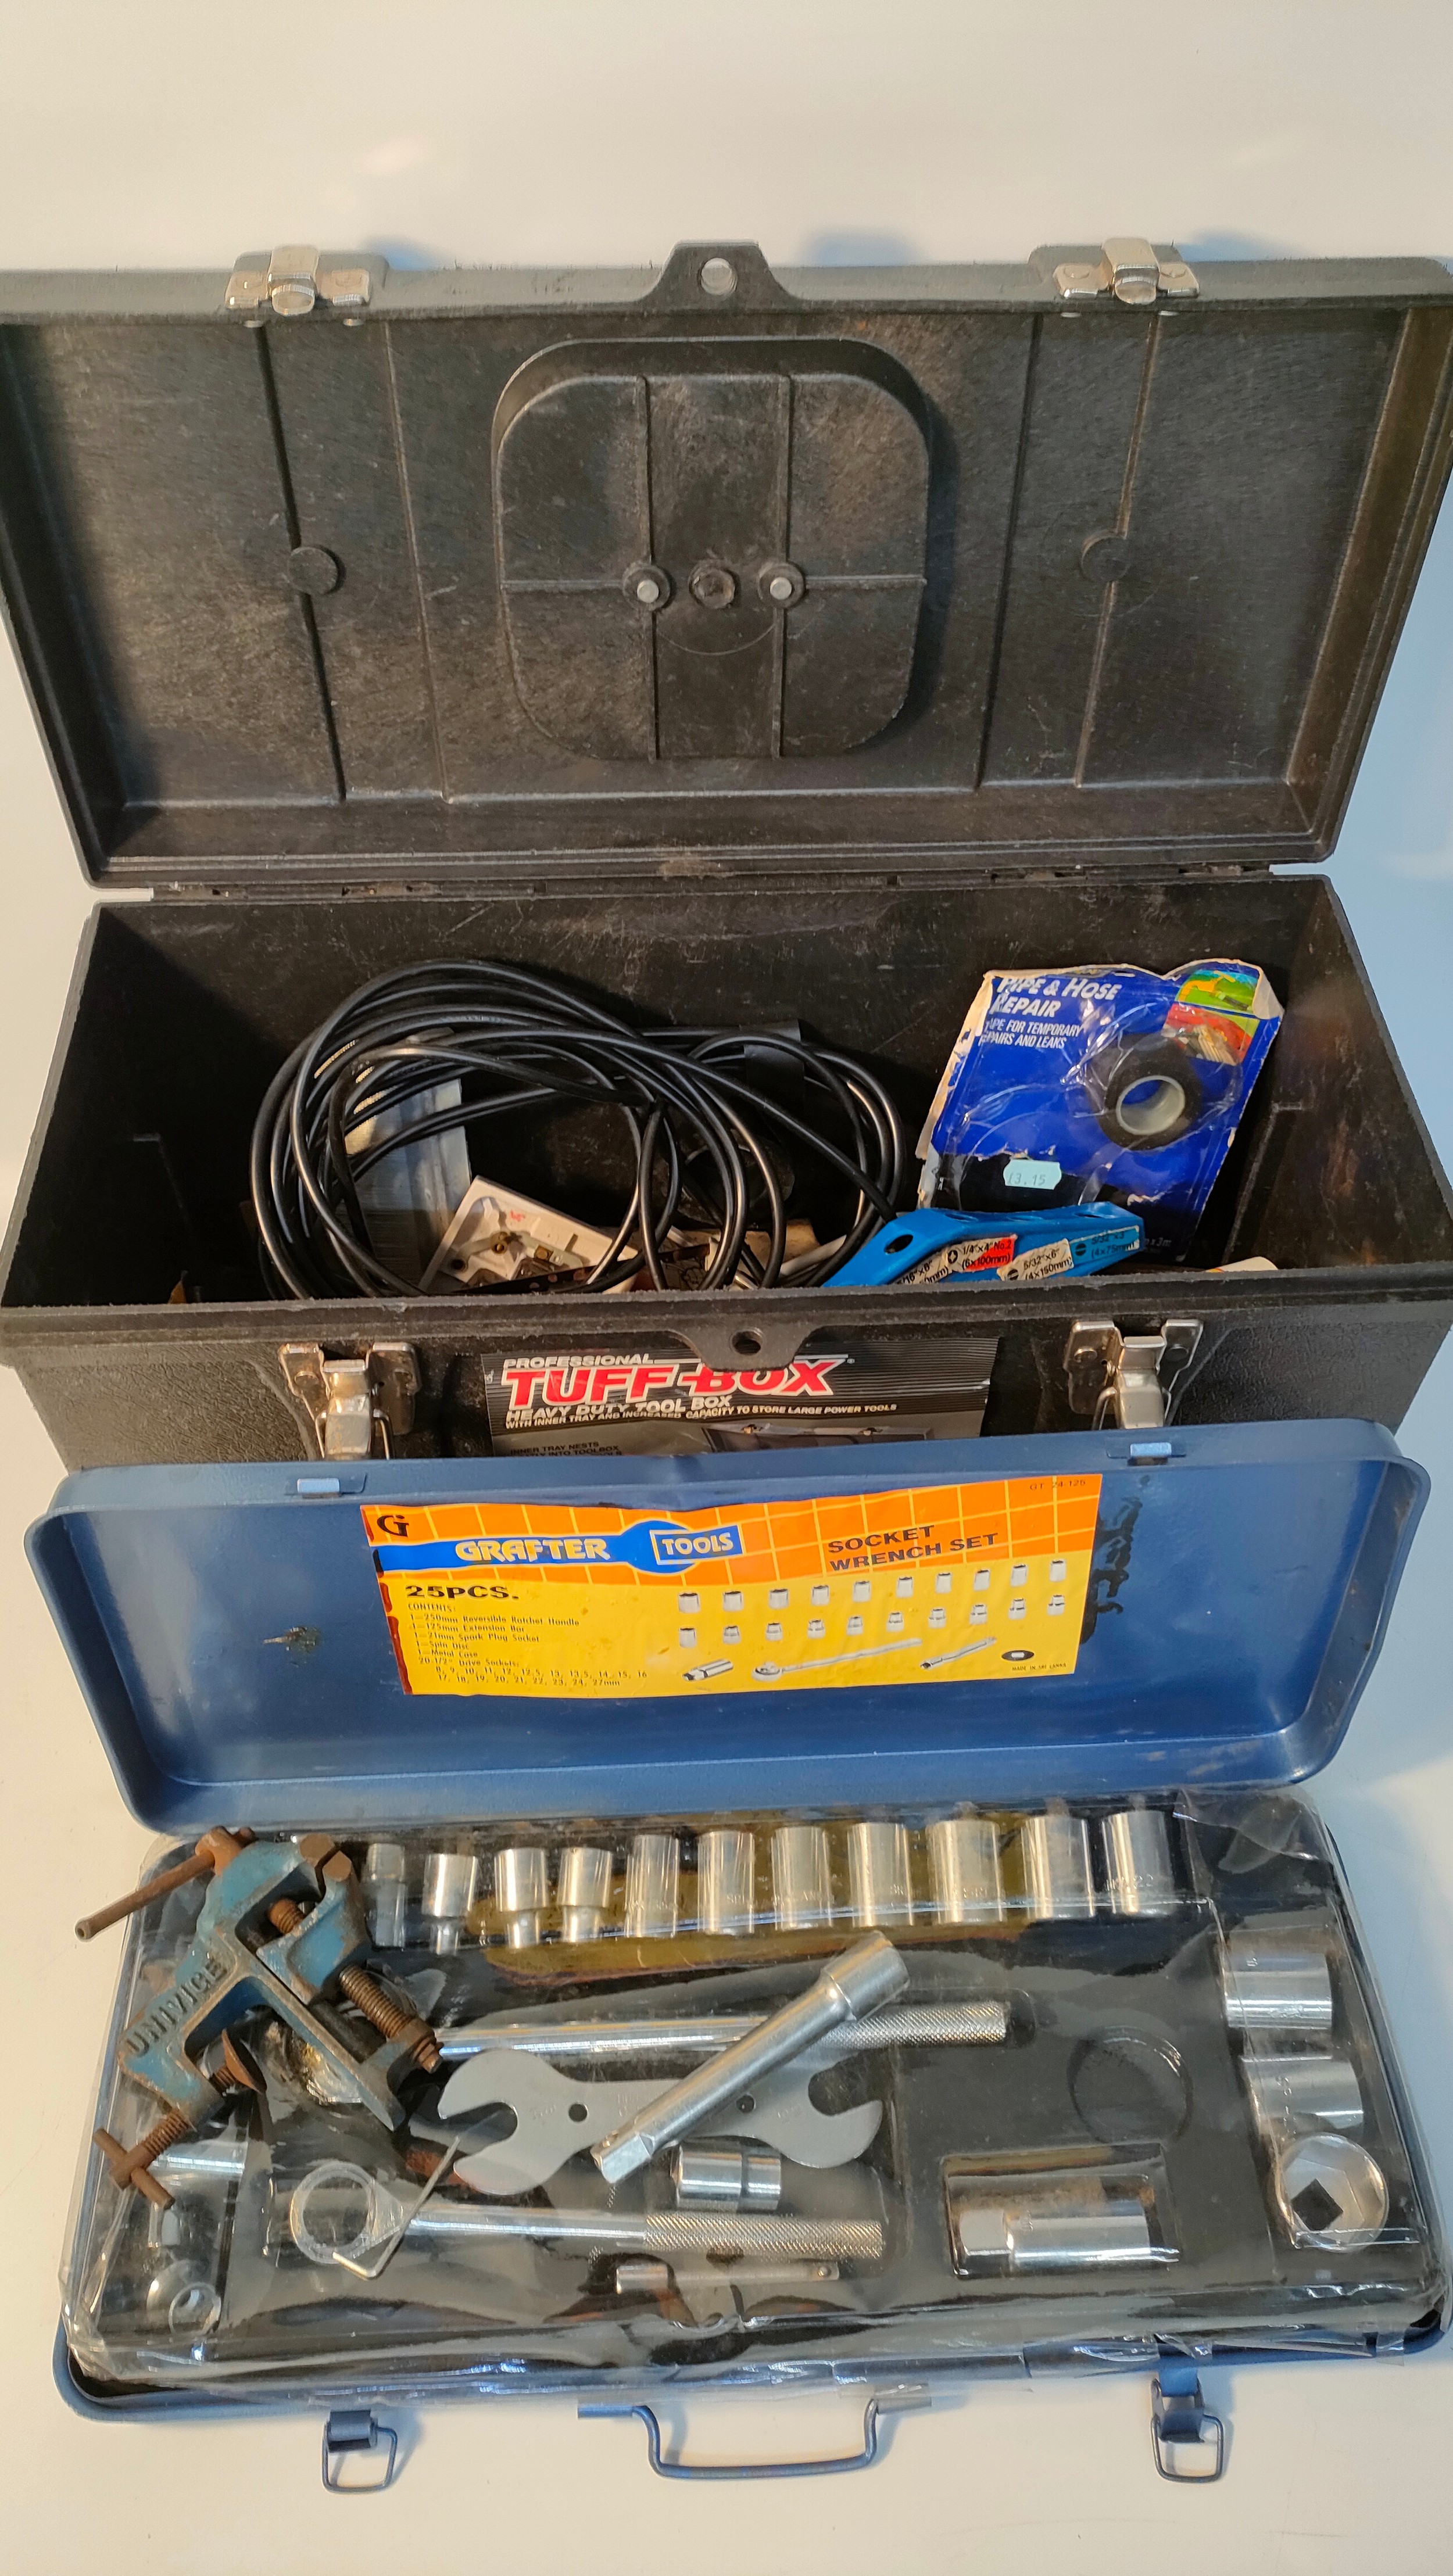 Tuff tool box with selection of tools.